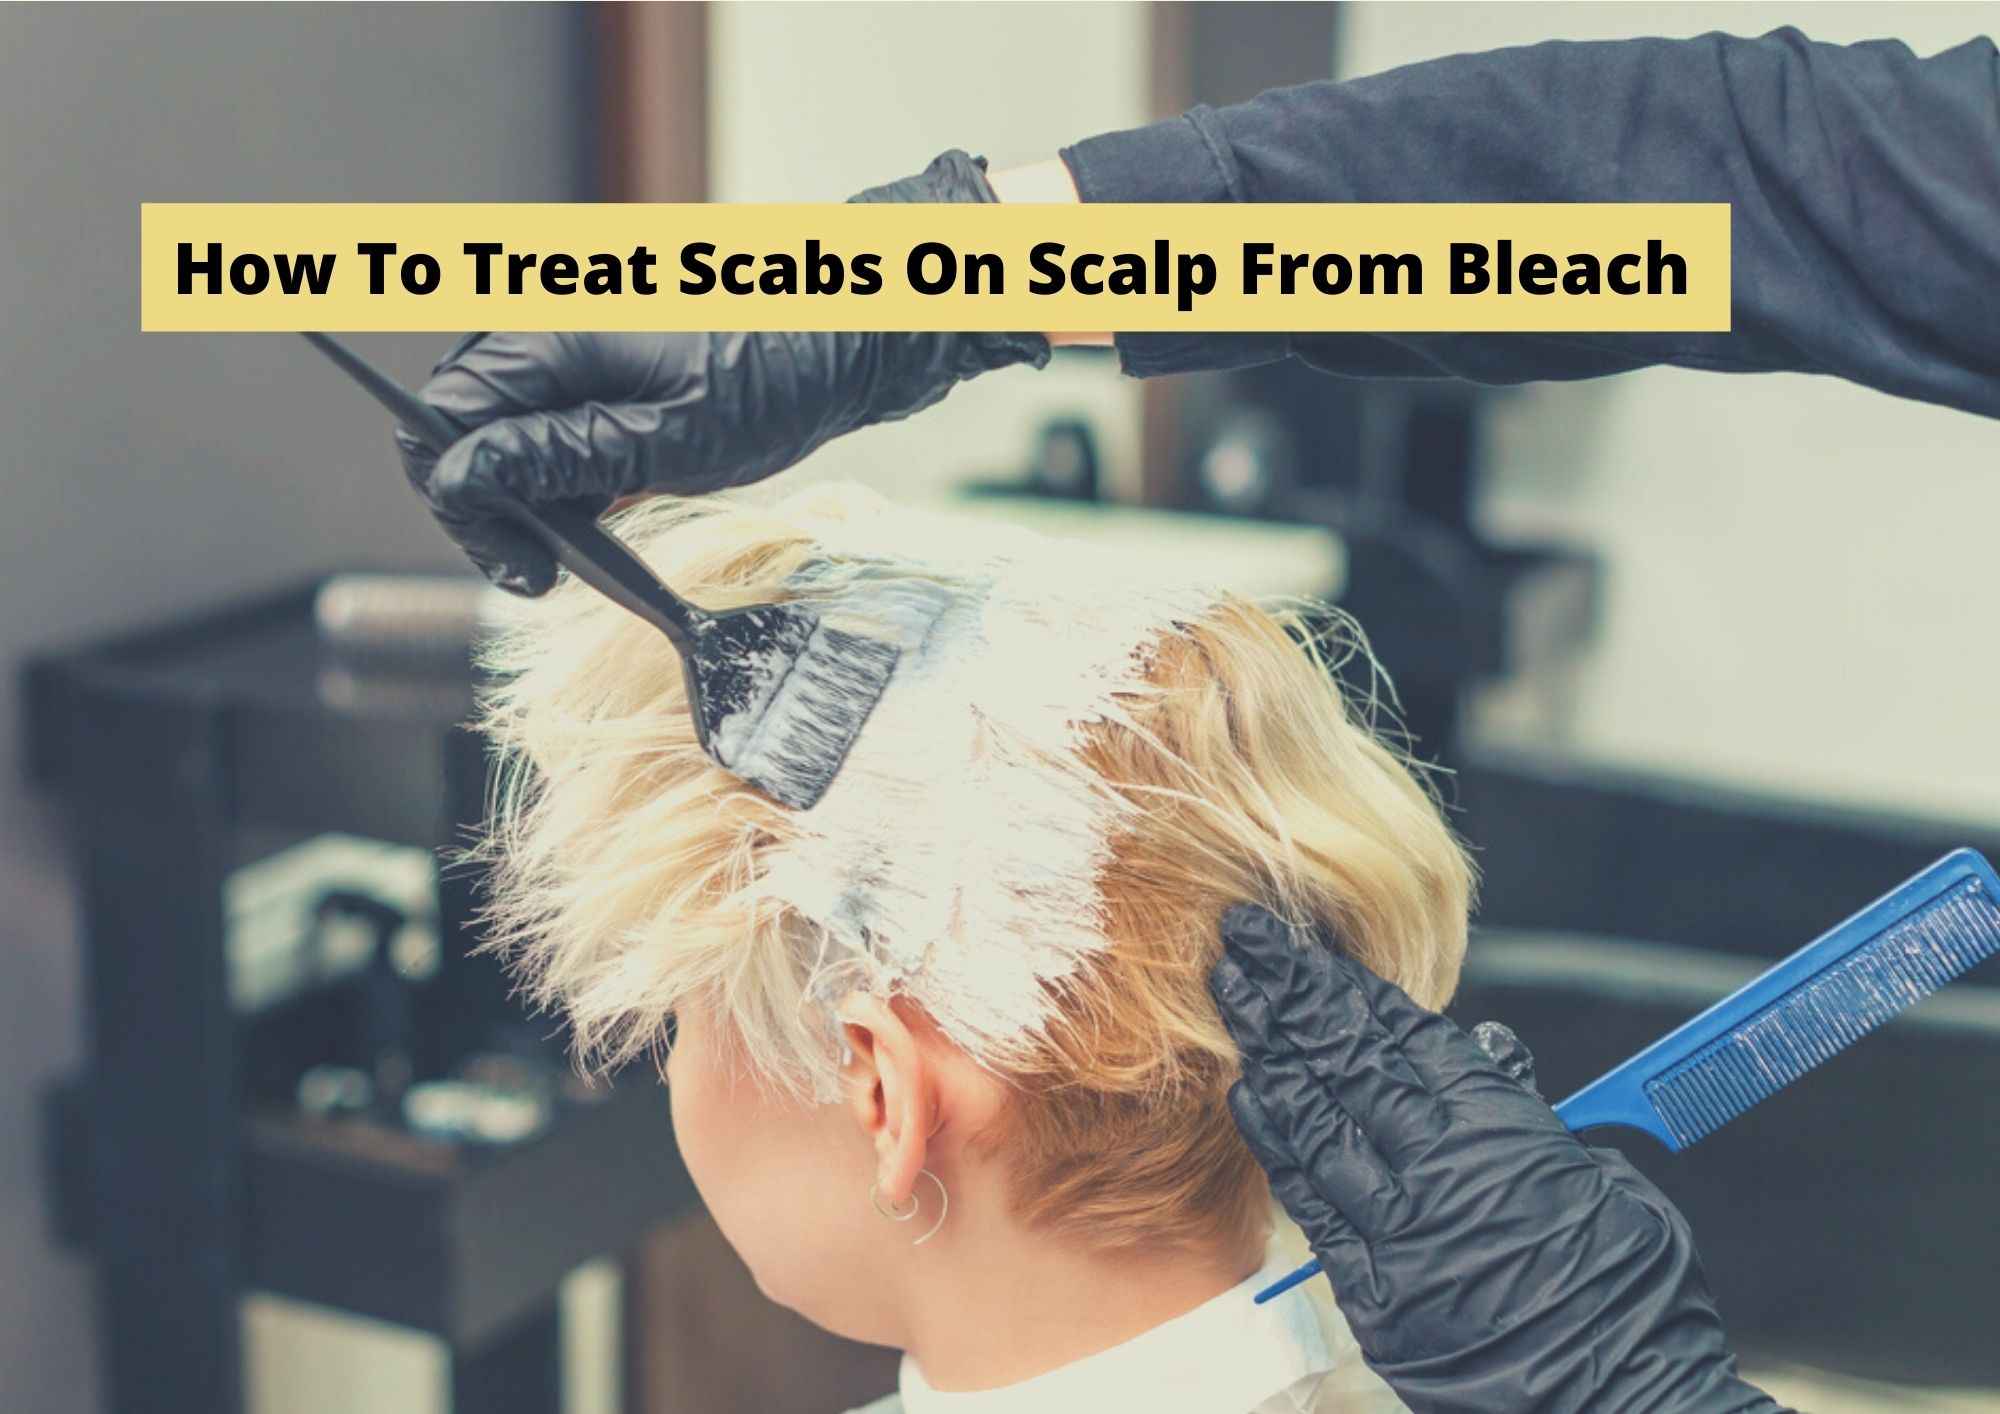 6 Tips On How To Treat Scabs On Scalp From Bleach 2023 | Treatments For  Bleach Burns, Sores, Irritation - Hair Everyday Review